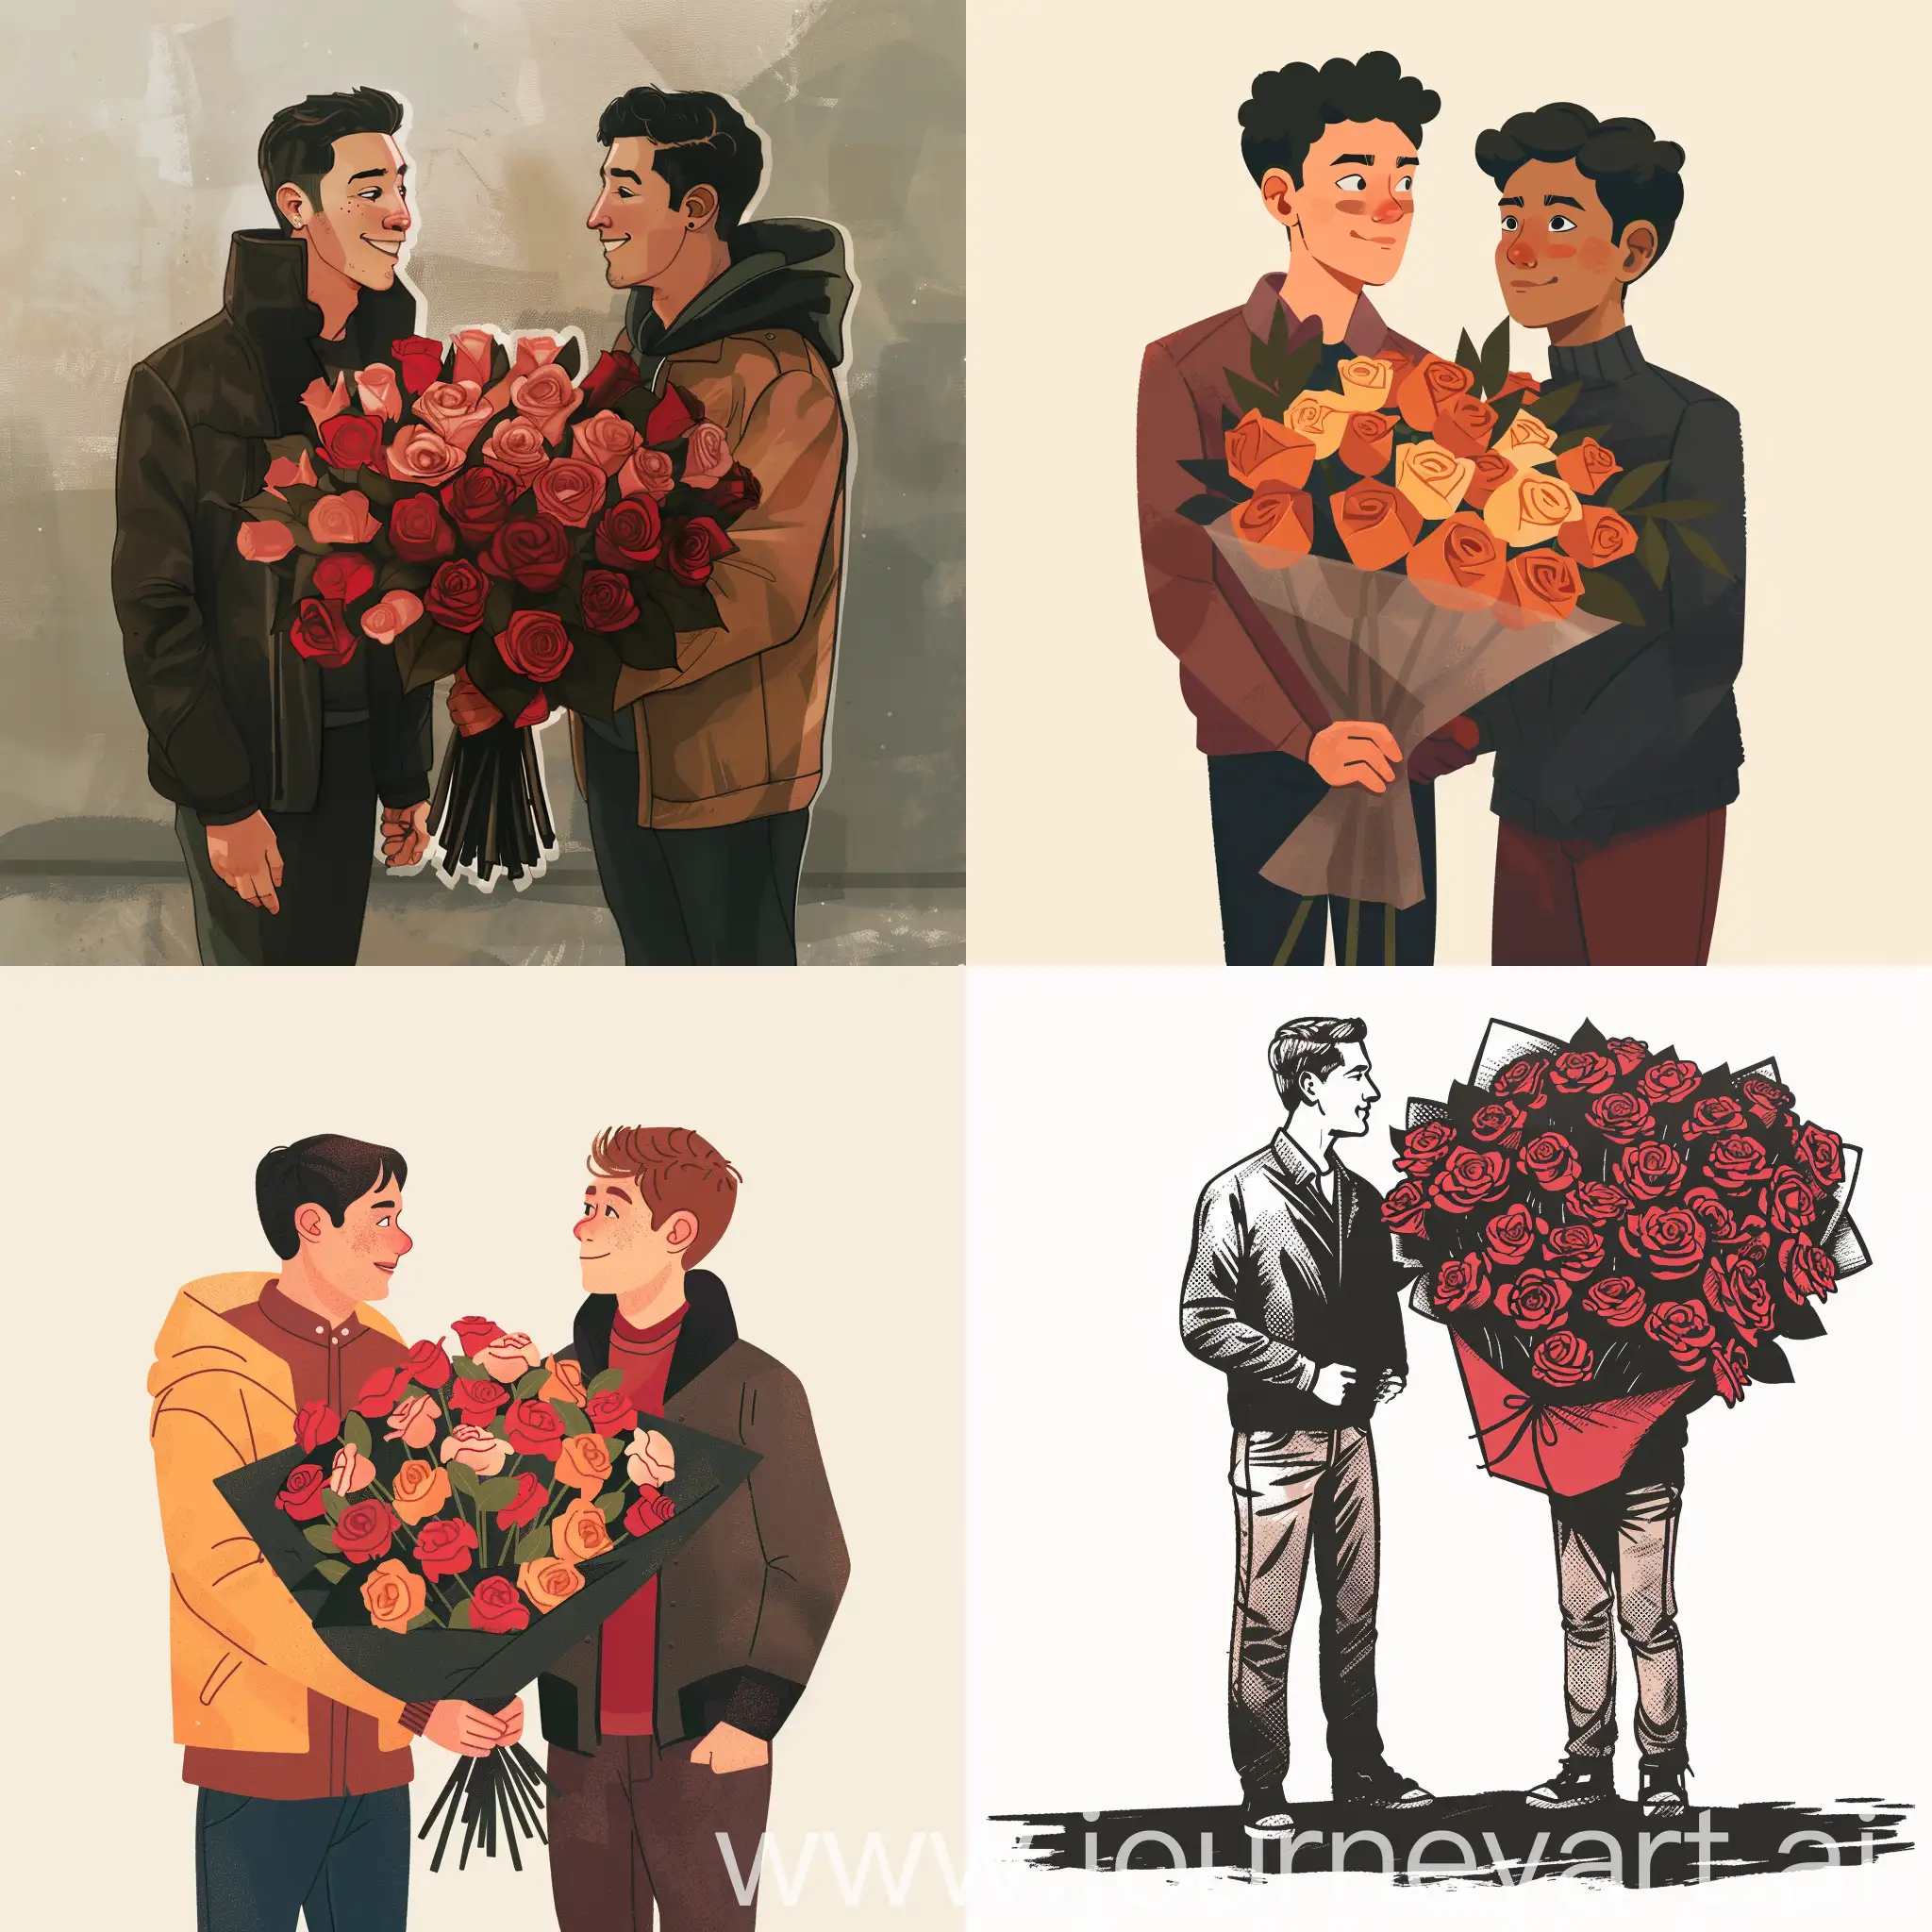 On Valentine's Day, there are two male lovers standing next to each other.  One person held a large bouquet of roses given to him by his male girlfriend.